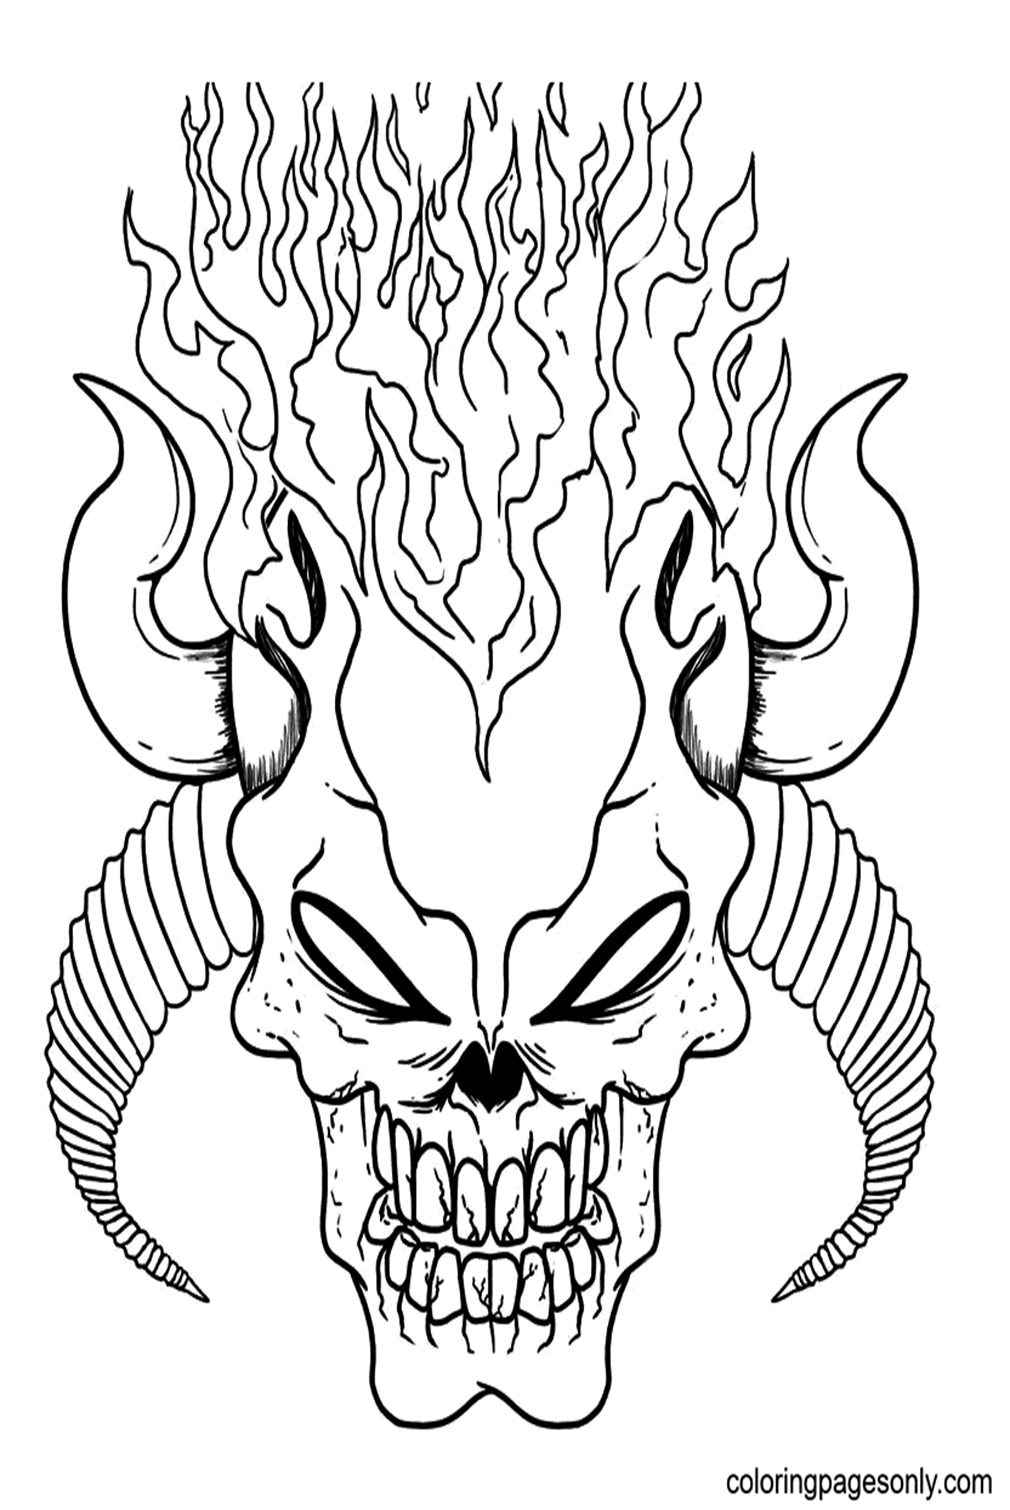 Halloween Scary Masks Coloring Pages